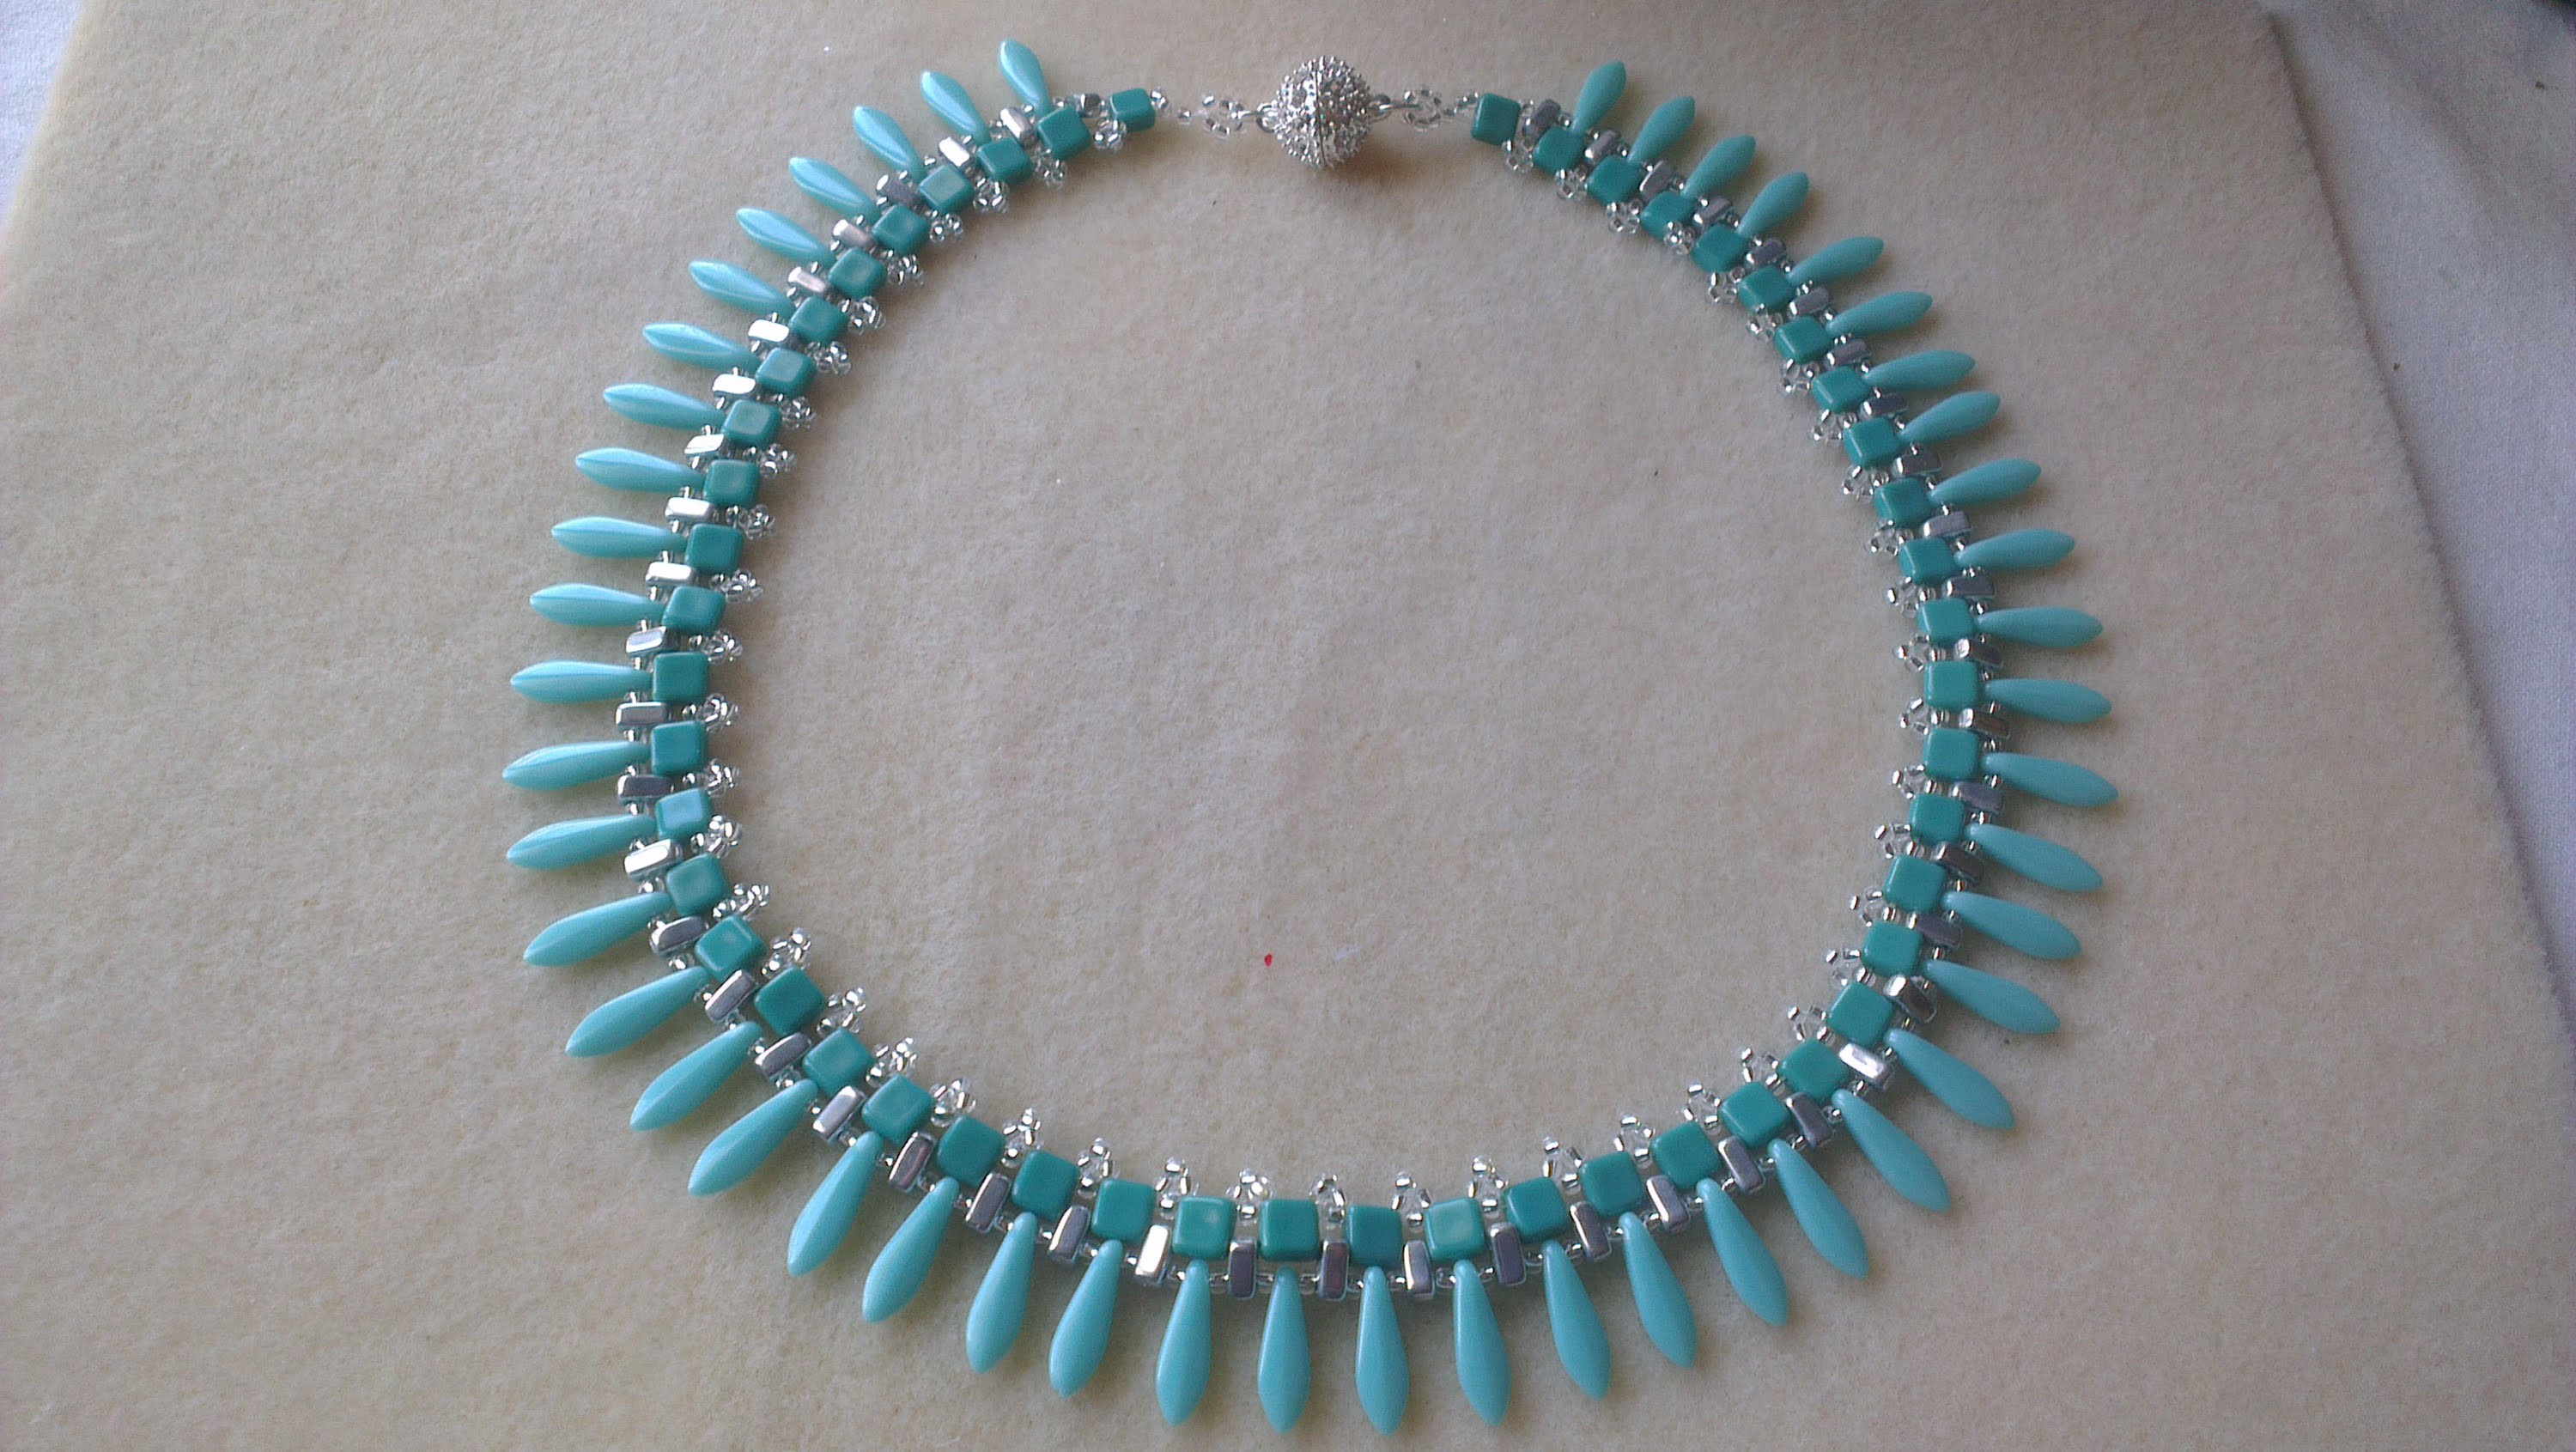 COLLAR PLATA Y VERDE TURQUESA-Turquoise and silver necklace